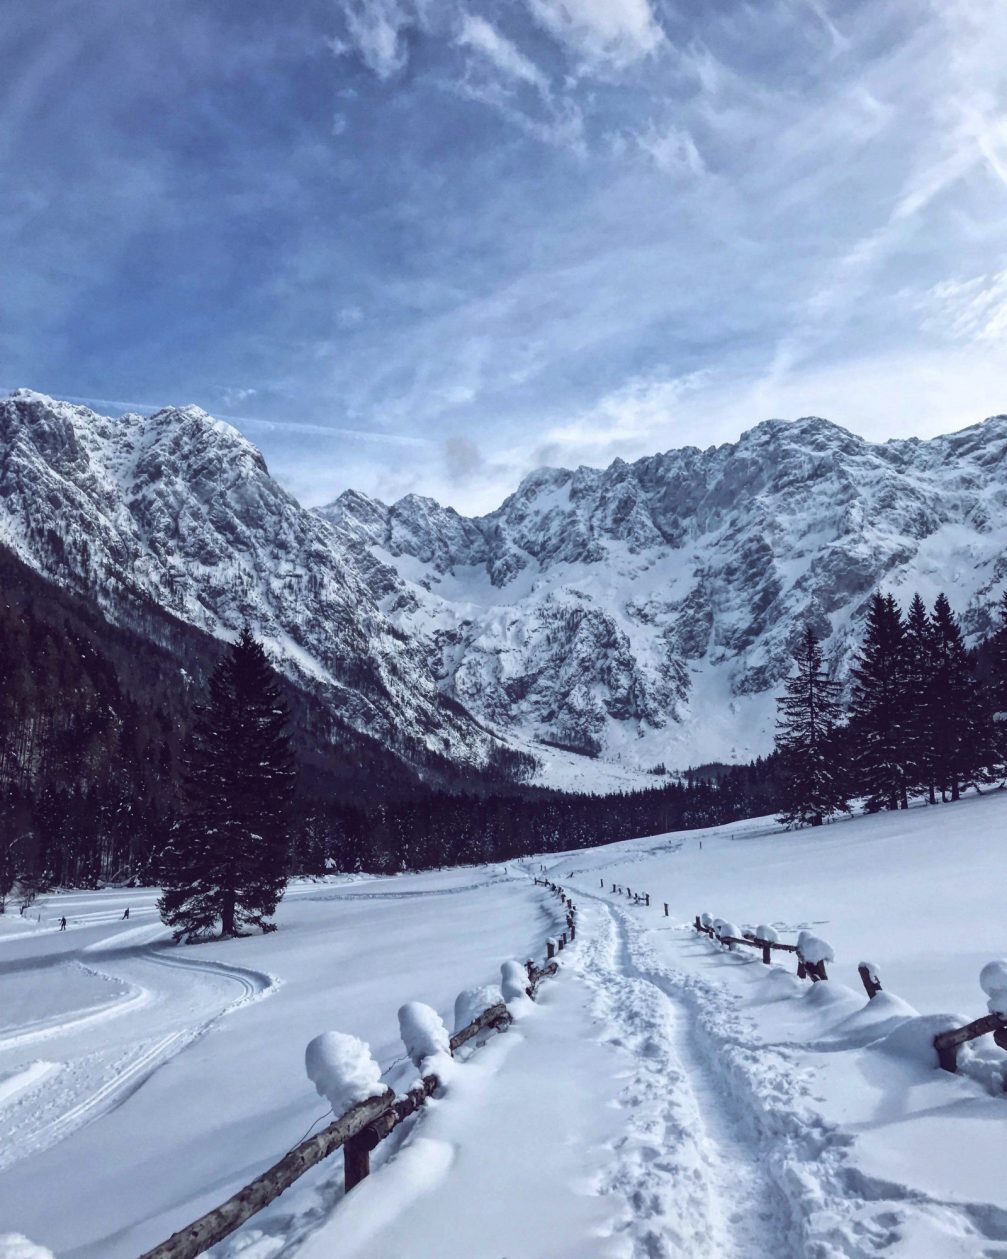 Jezersko in Slovenia covered in snow on a clear winter's day